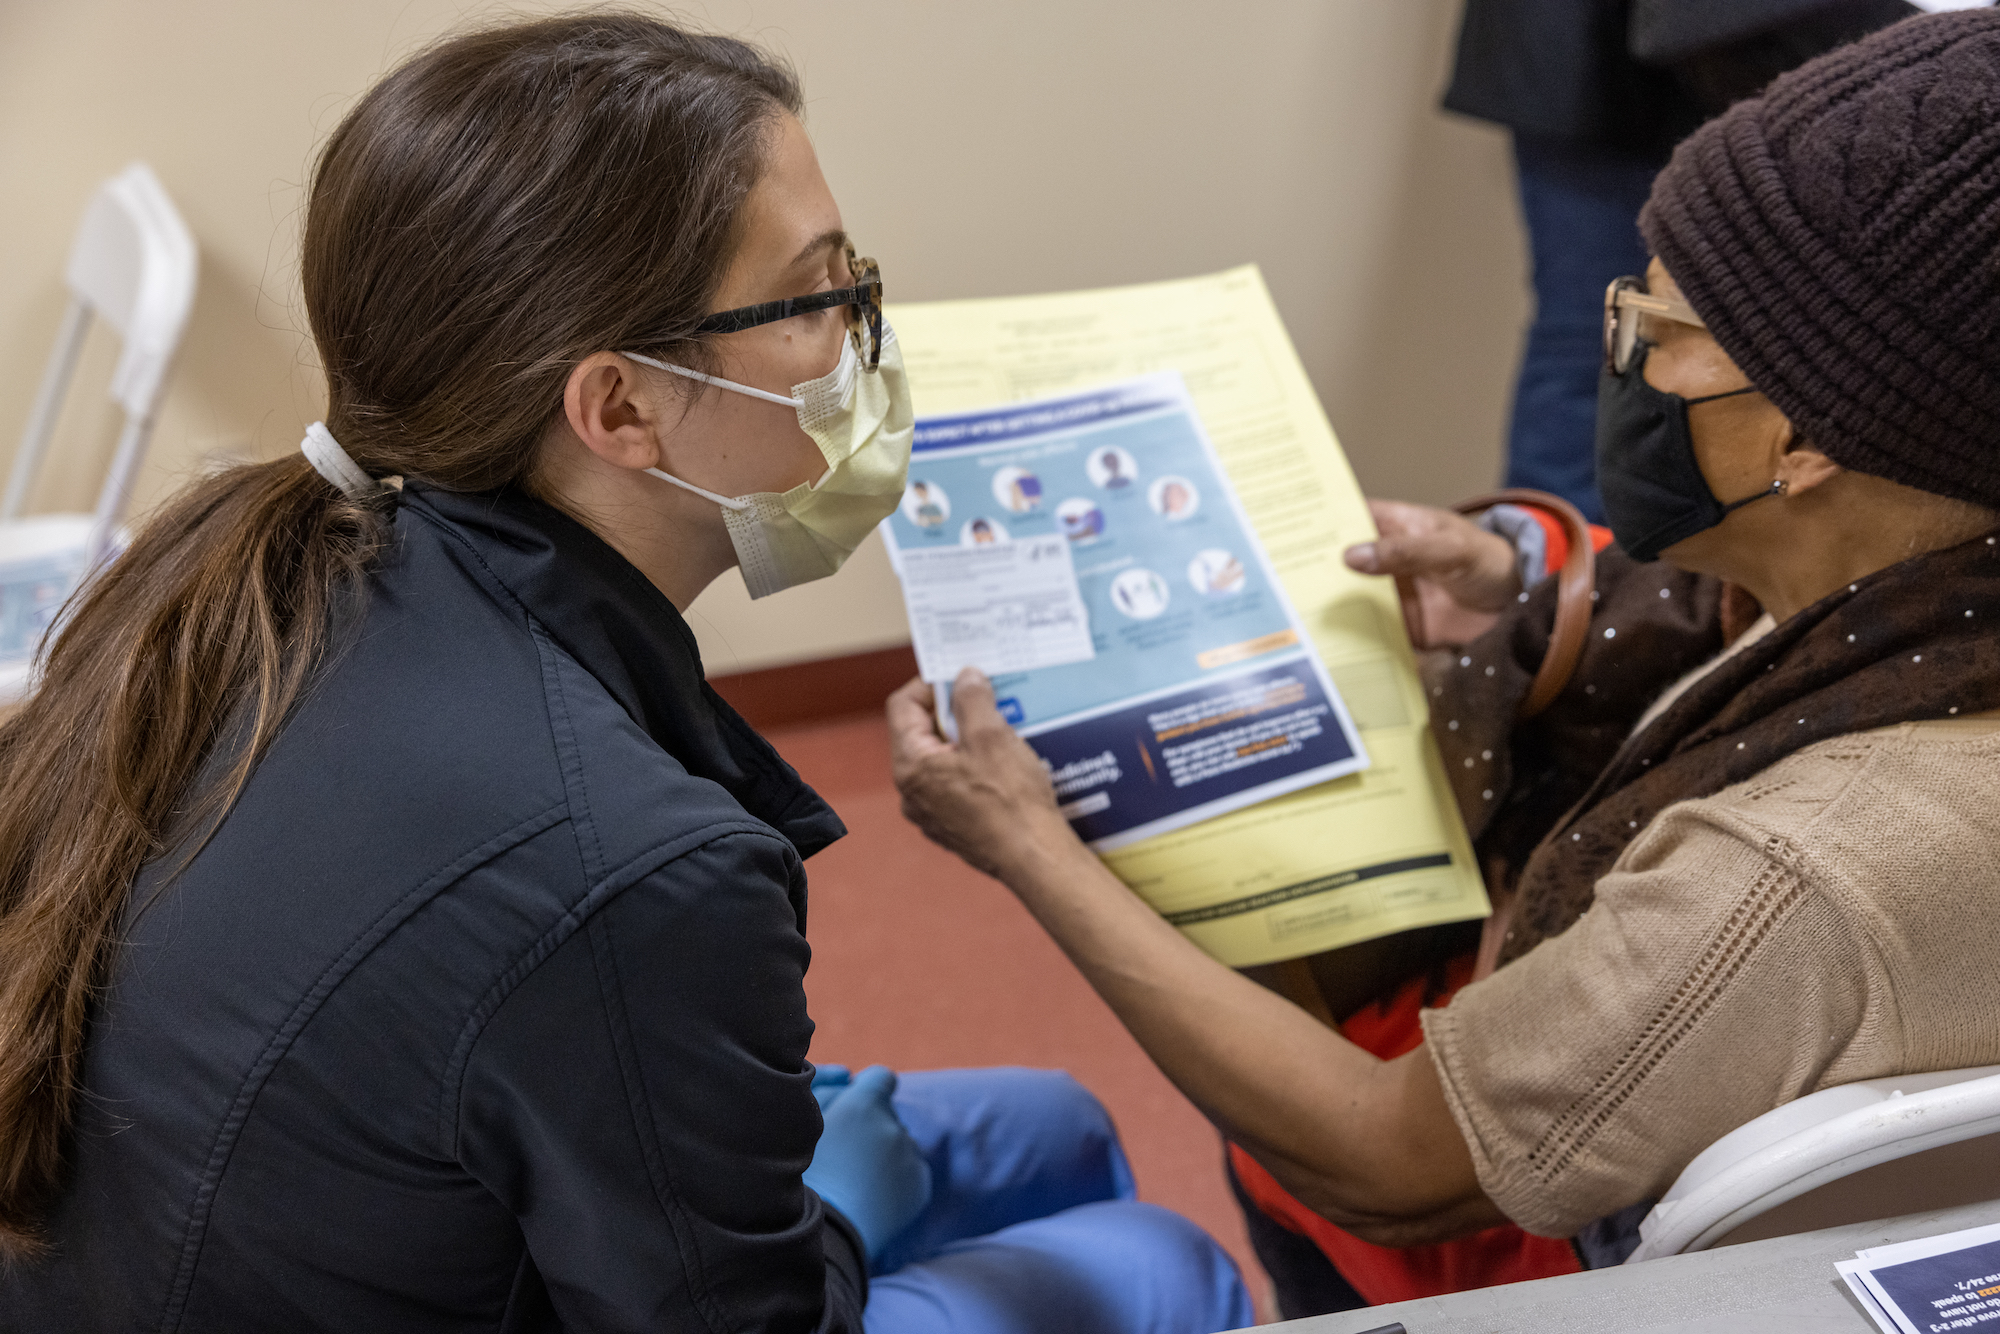 medical professional gives informational materials to a patient